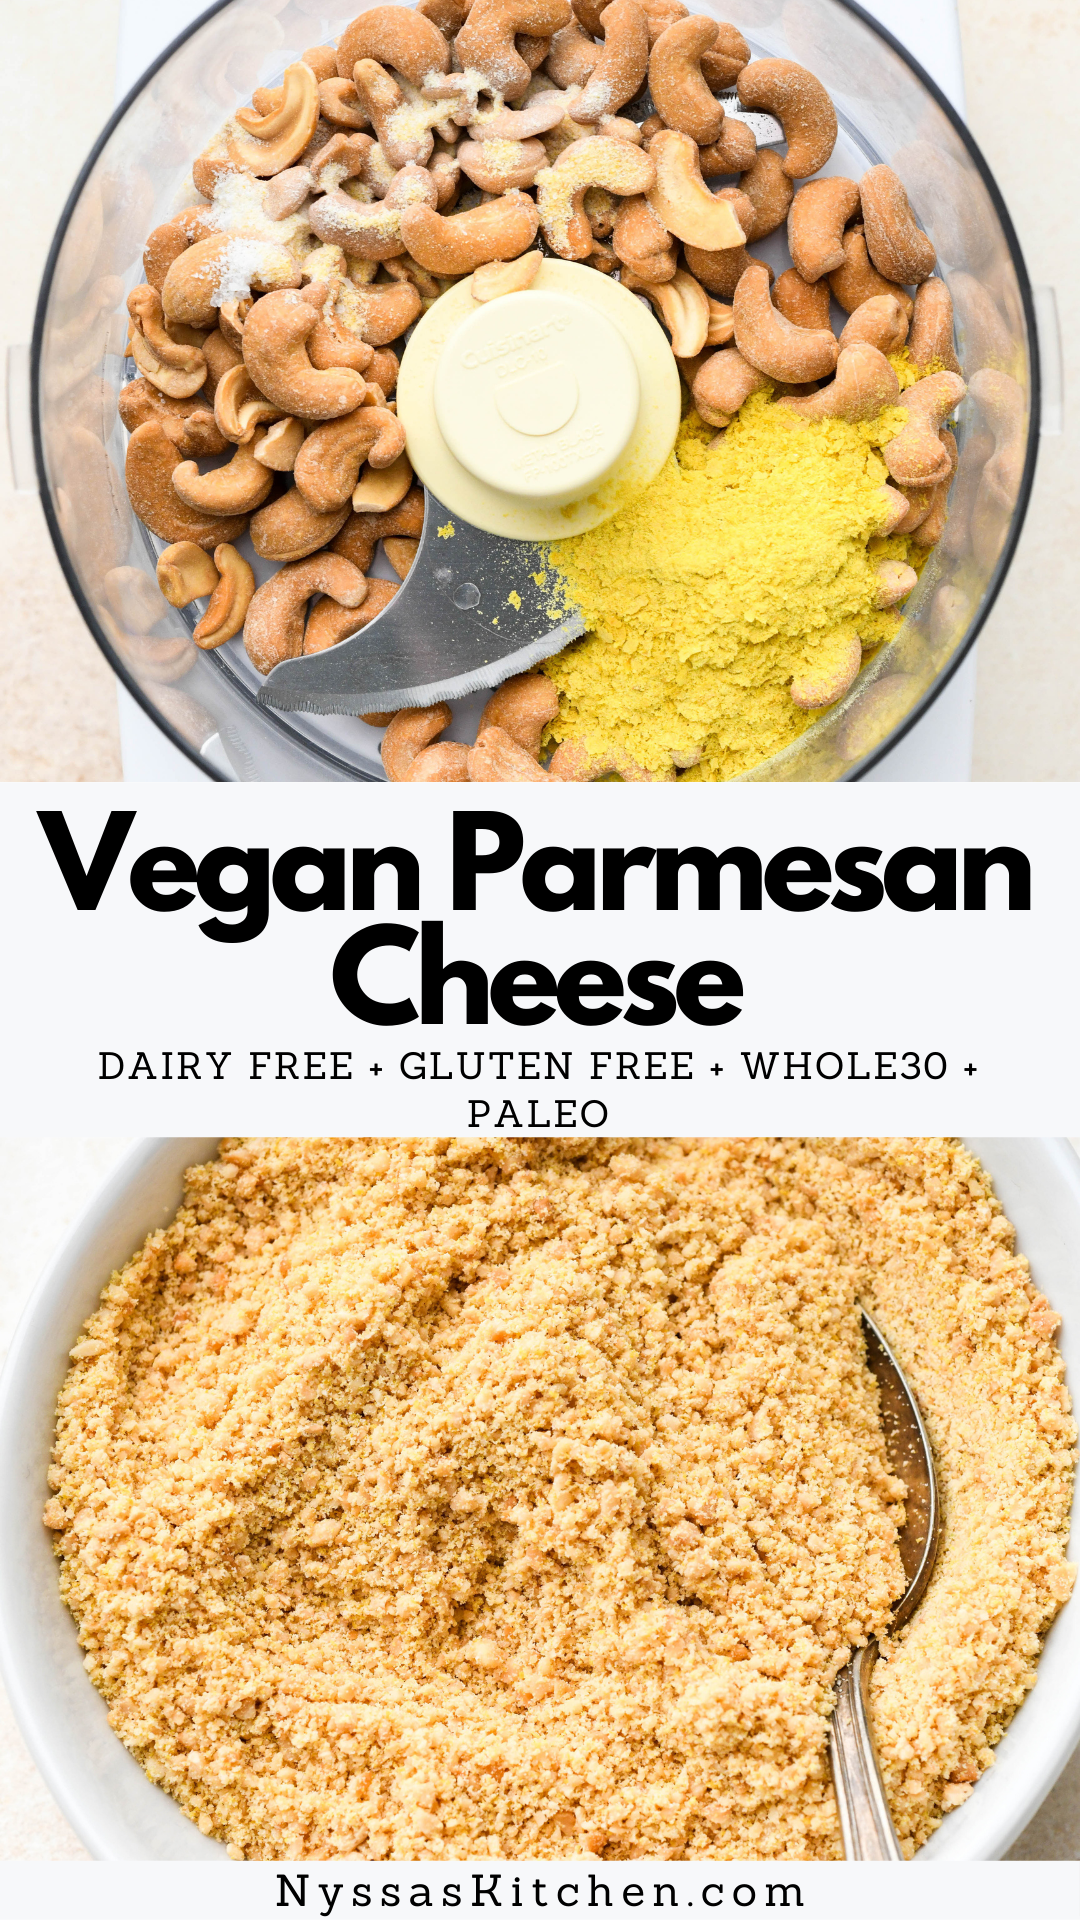 This homemade vegan parmesan cheese is the ultimate dairy free alternative for parm. It is healthy, savory, made with just 5 ingredients, and keeps well in the refrigerator for several weeks at a time. Vegan, gluten free, dairy free, paleo, and Whole30 compatible.